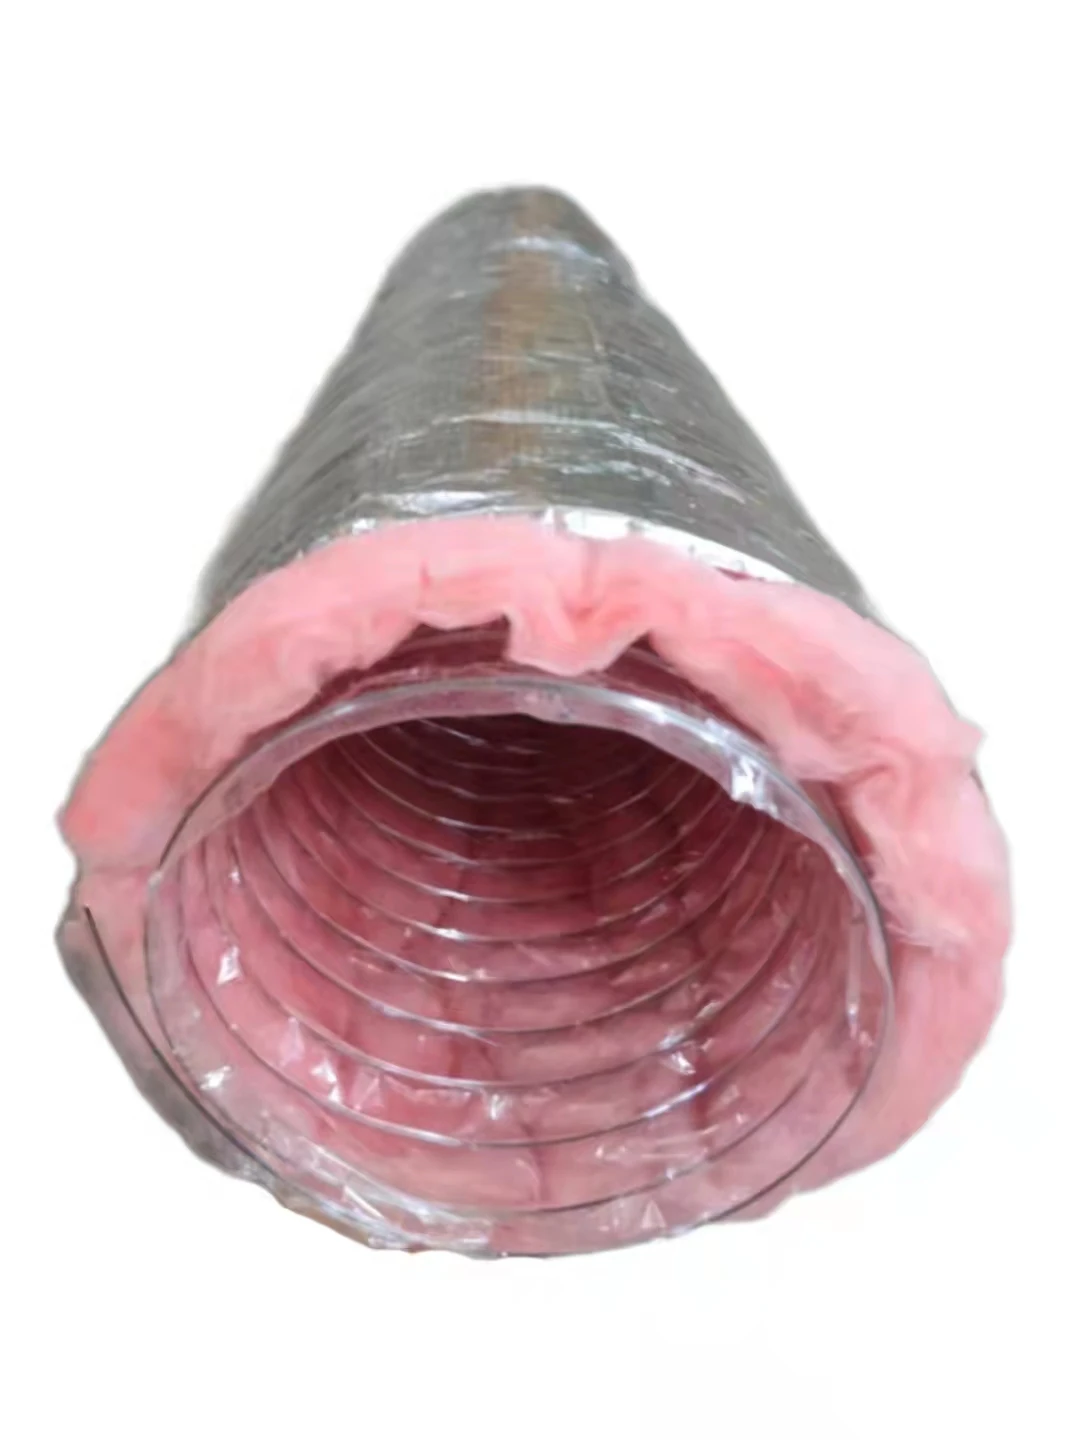 25ft 50ft Flexible Duct All Sizes R4r6r8 Flex Duct Insulated Fabric Duct Buy Home Hvac 9343